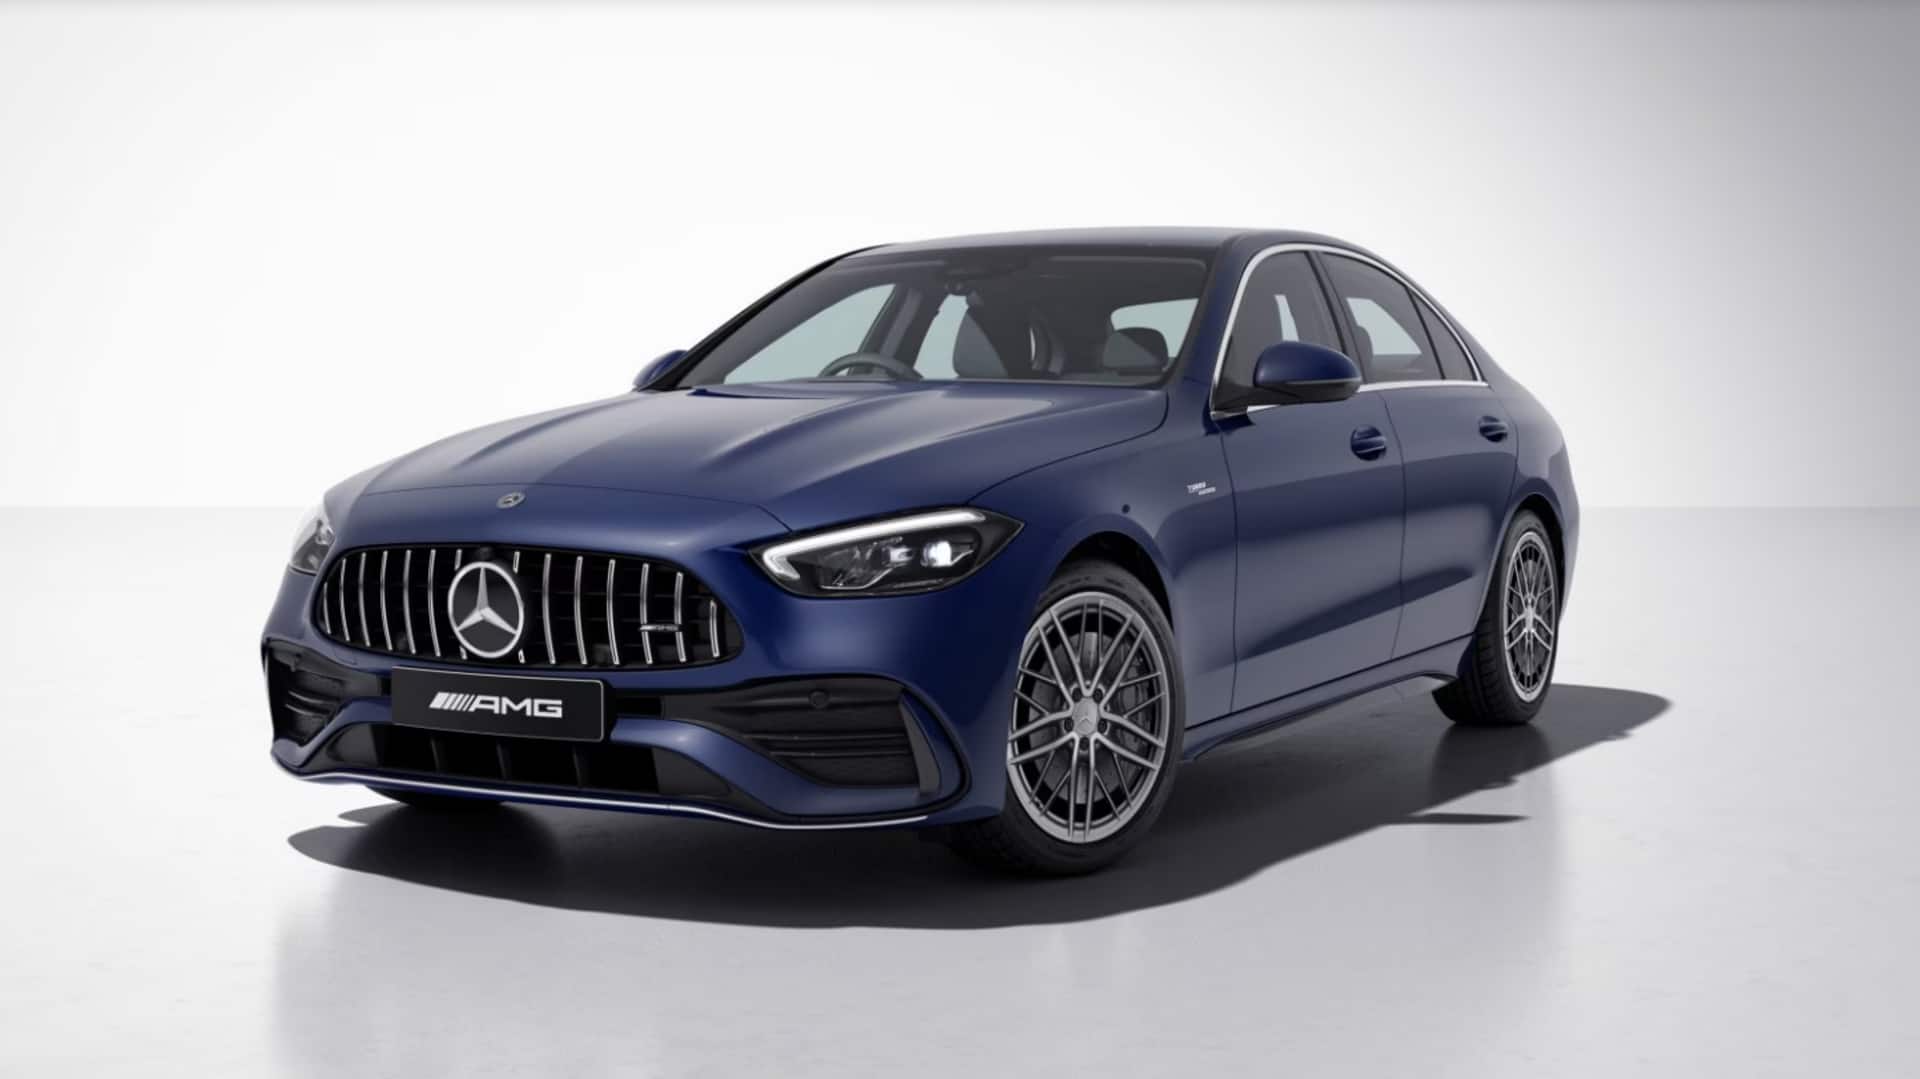 Mercedes-AMG C 43 4MATIC arrives in India: Check best features